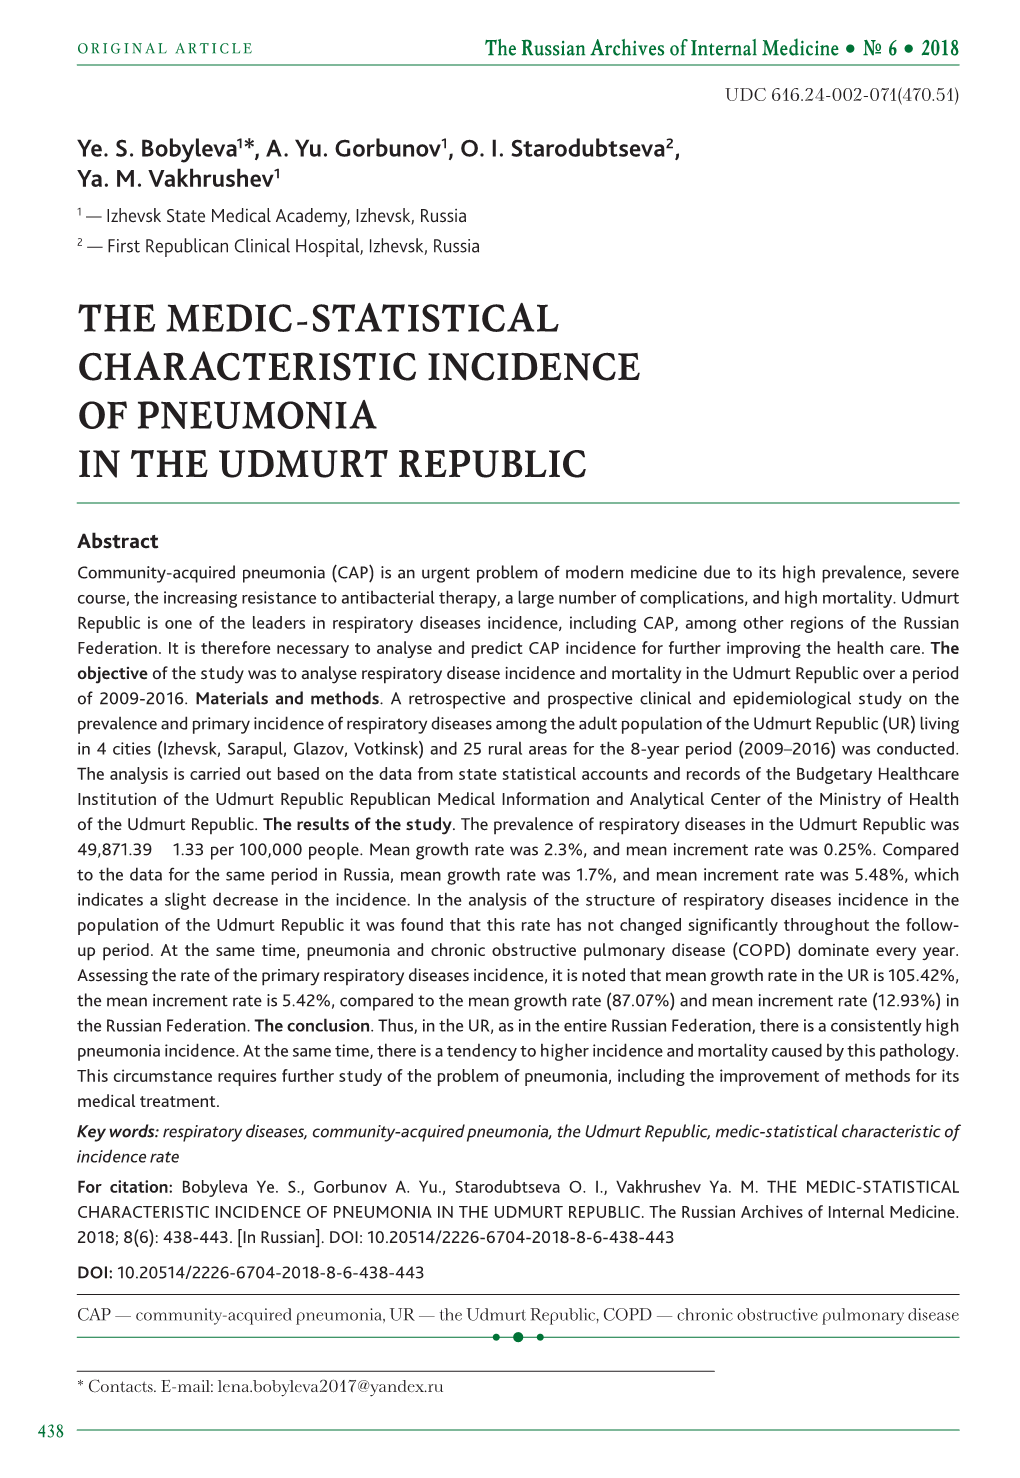 The Medic-Statistical Characteristic Incidence of Pneumonia in the Udmurt Republic